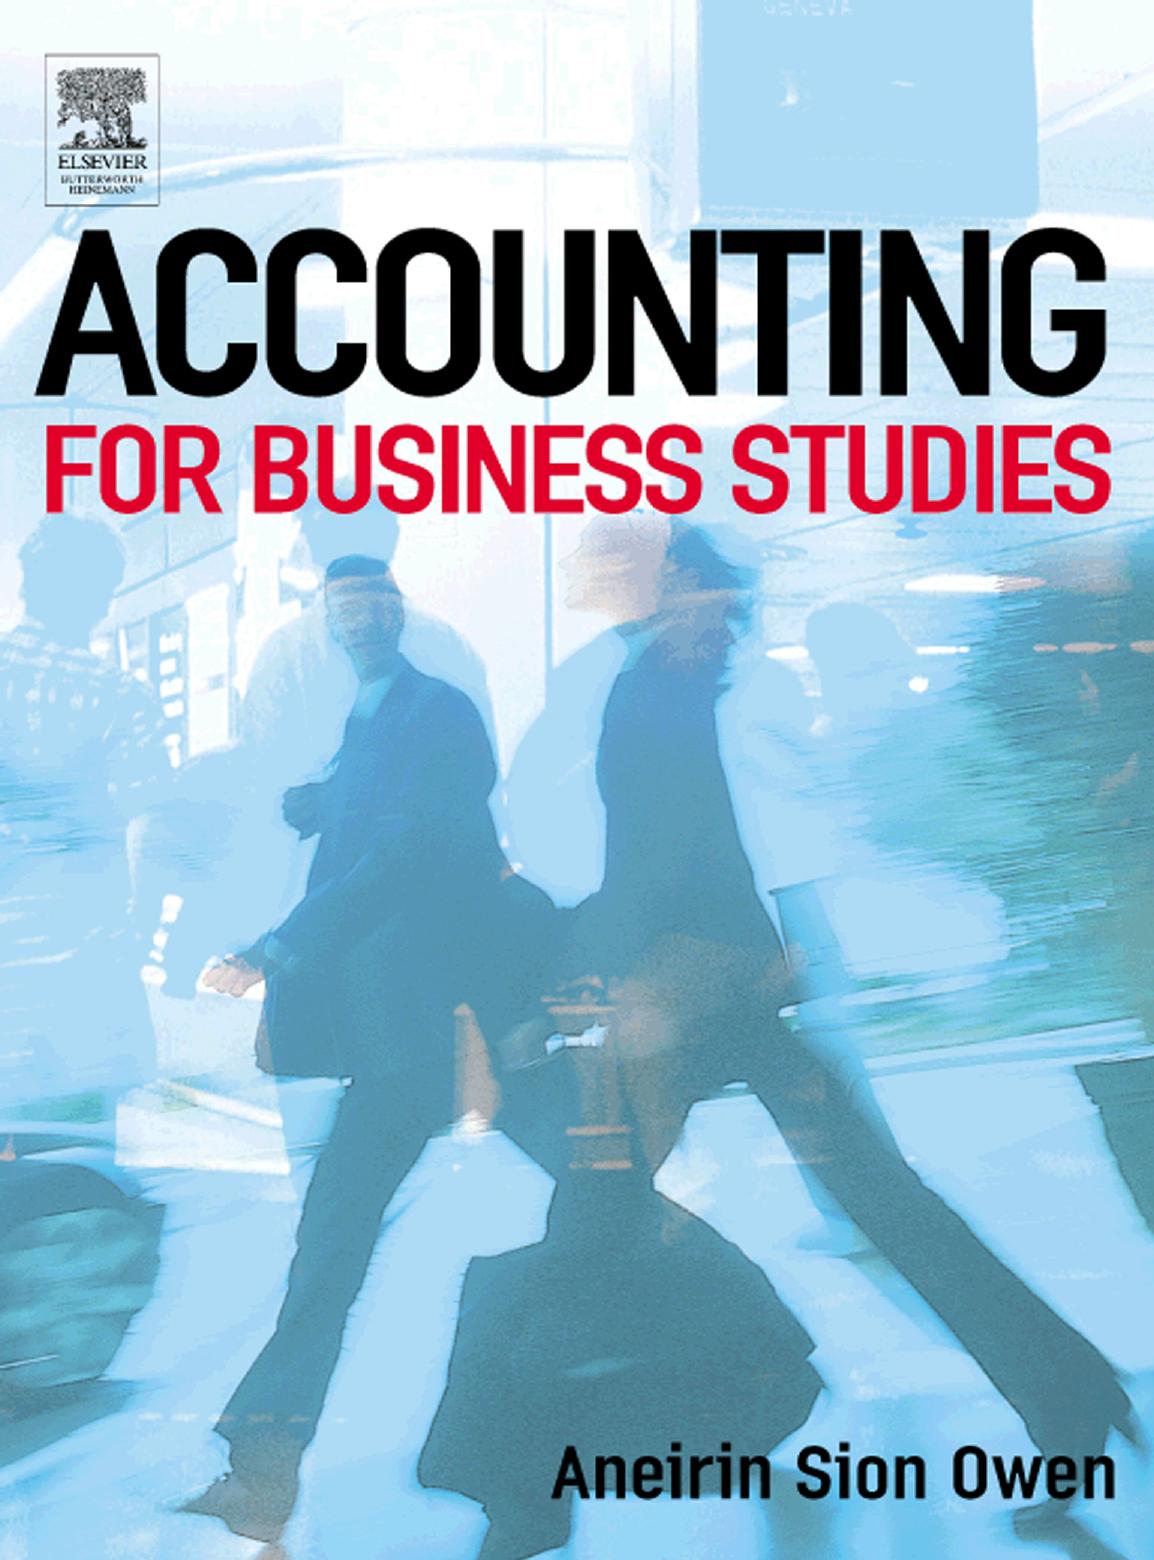 Accounting for Business Studies.jpg